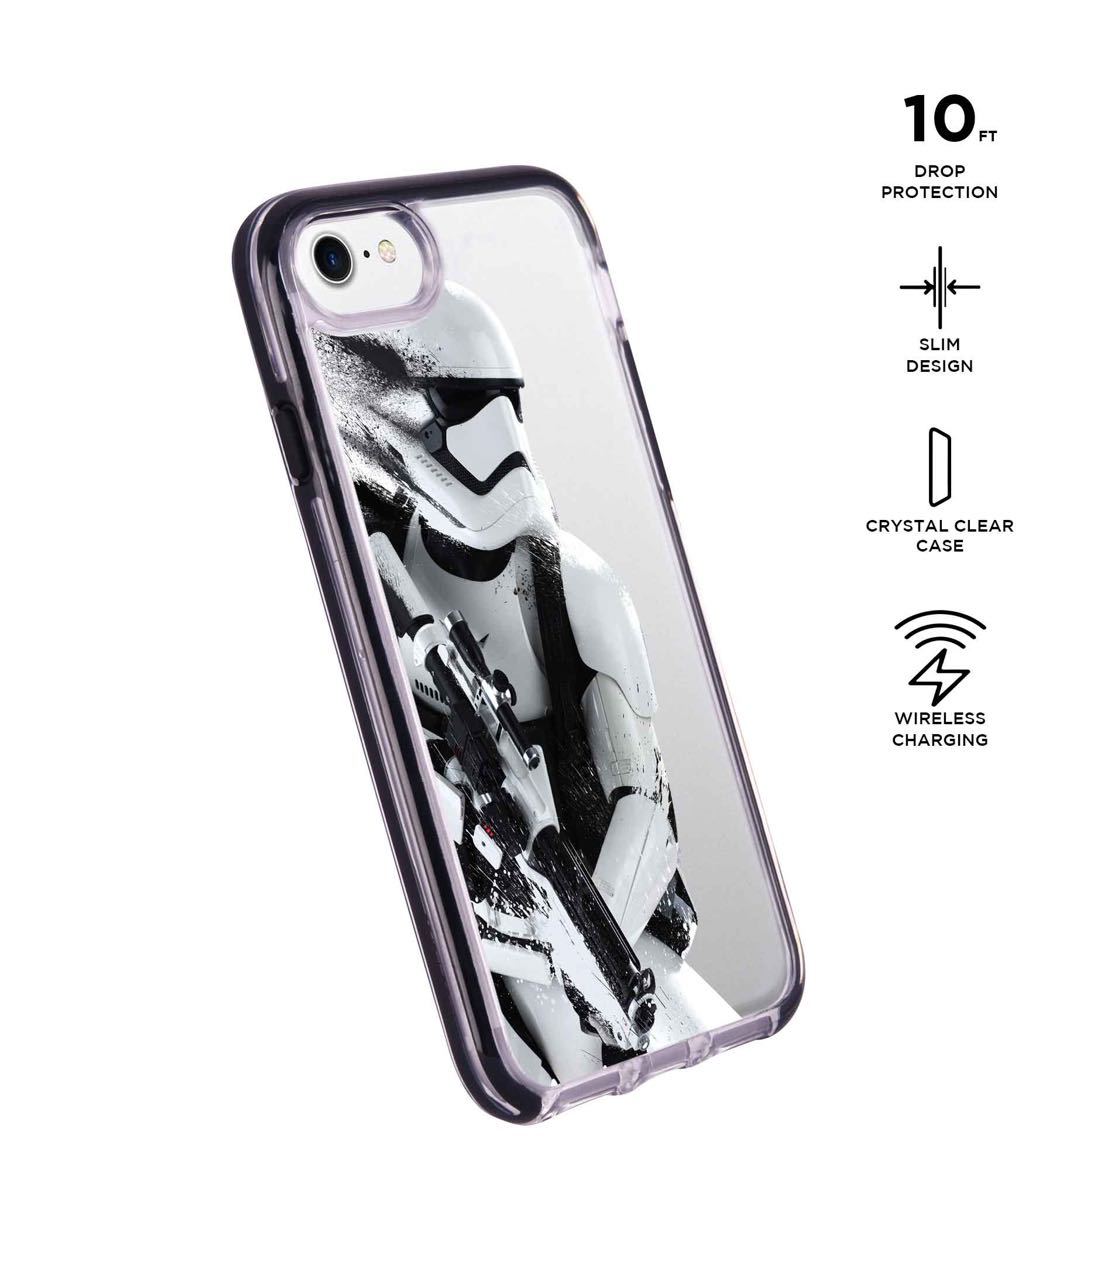 Trooper Storm - Extreme Phone Case for iPhone 7